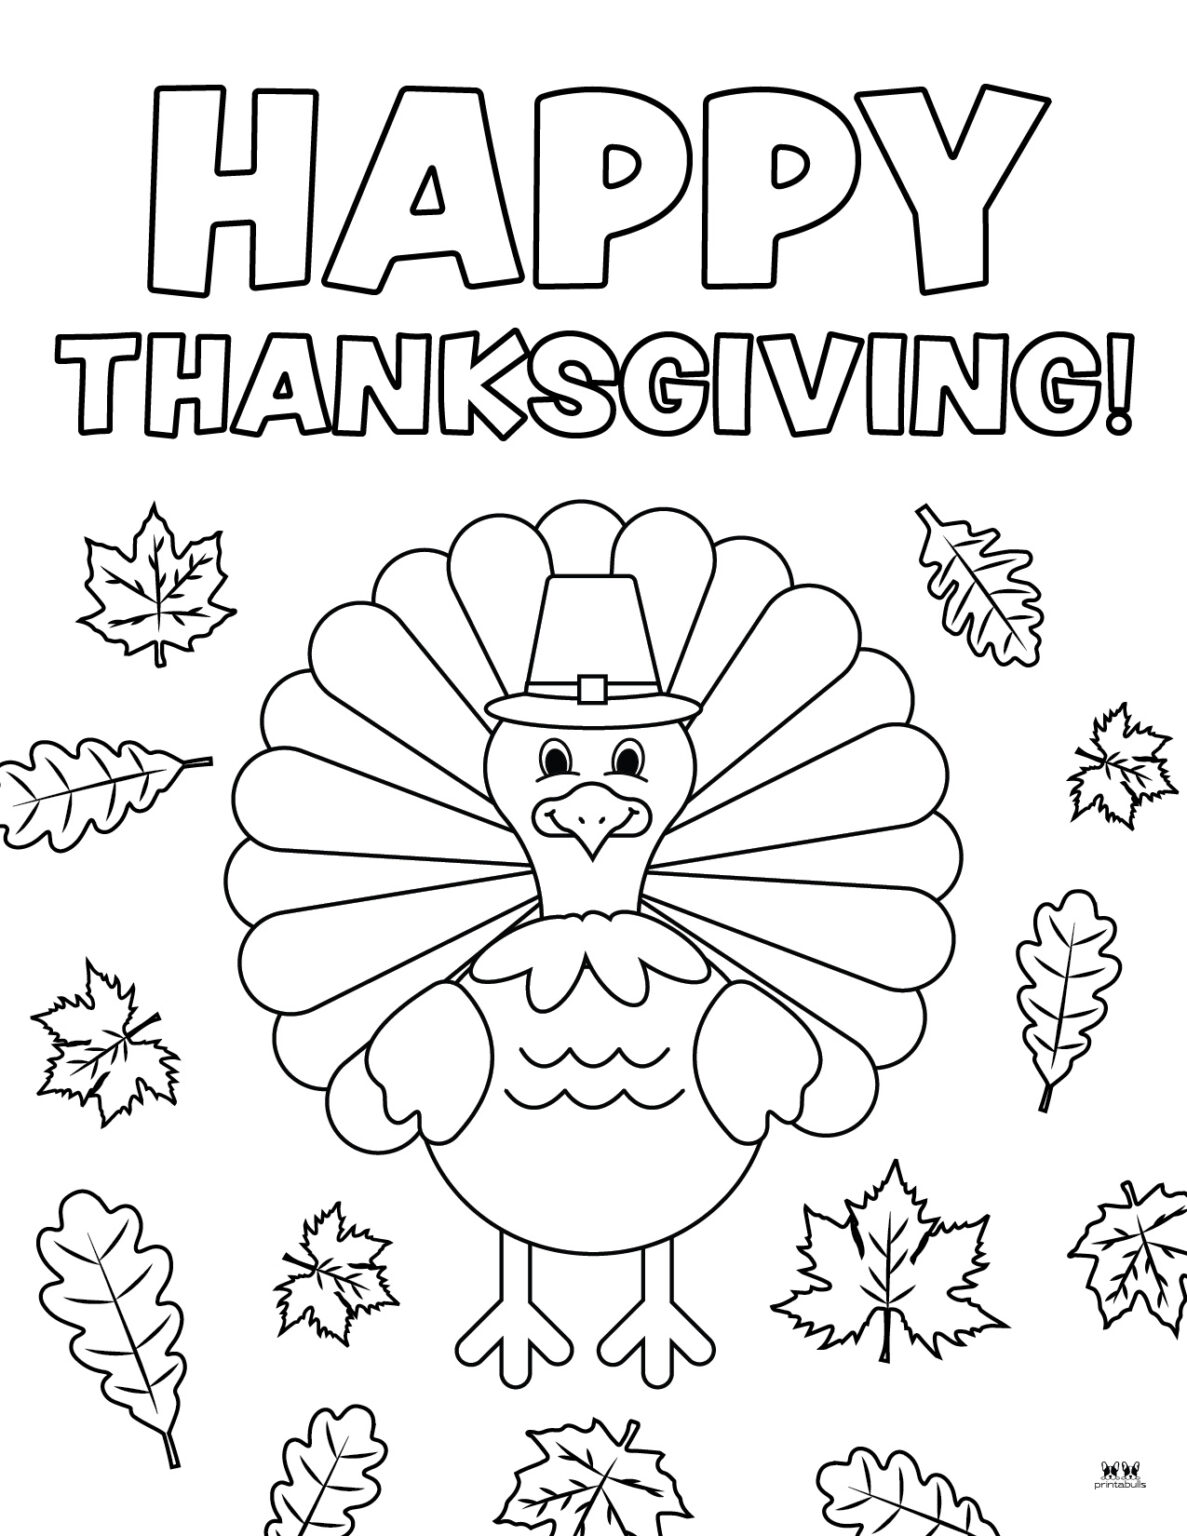 Happy Thanksgiving Coloring Pages - 20 FREE Printables | Printabulls